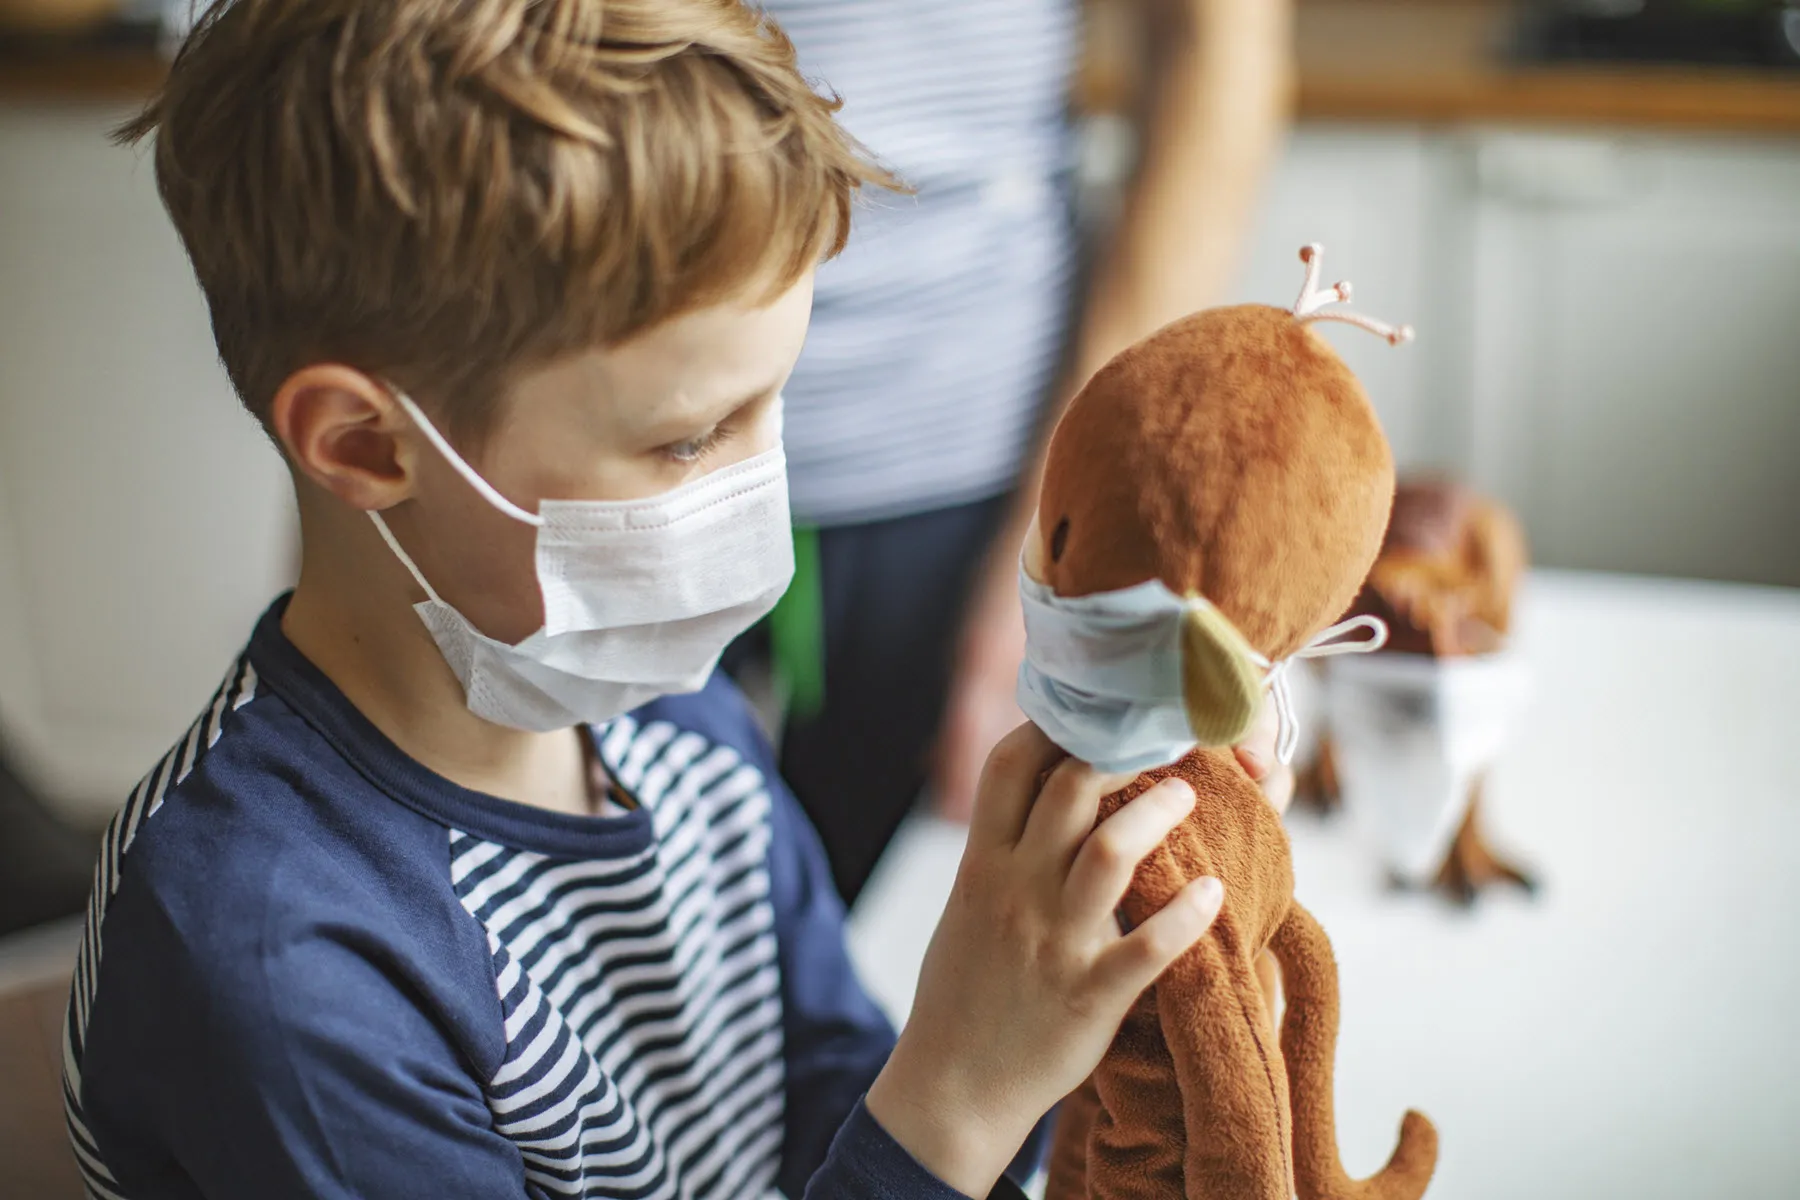 Heart Function Rebounds for Kids With COVID-Linked MIS-C